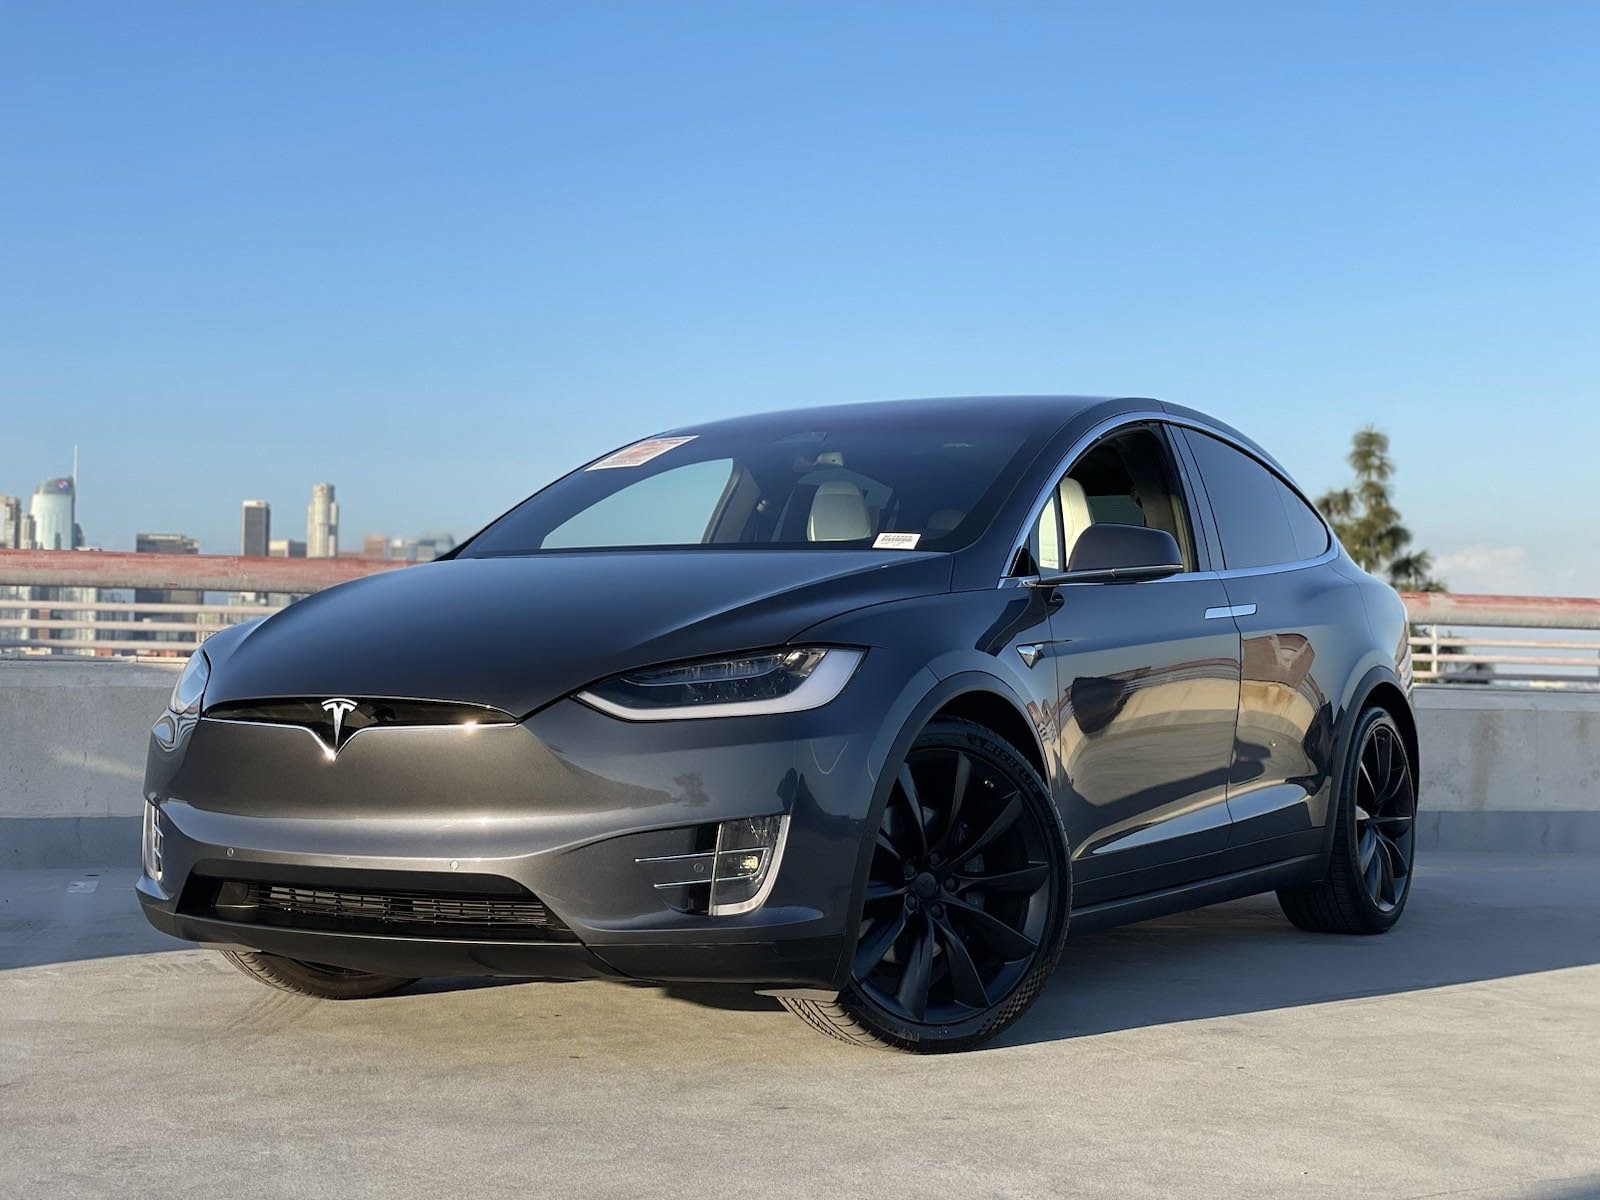 Used 2018 Tesla Model X 100D with VIN 5YJXCDE20JF123999 for sale in Los Angeles, CA